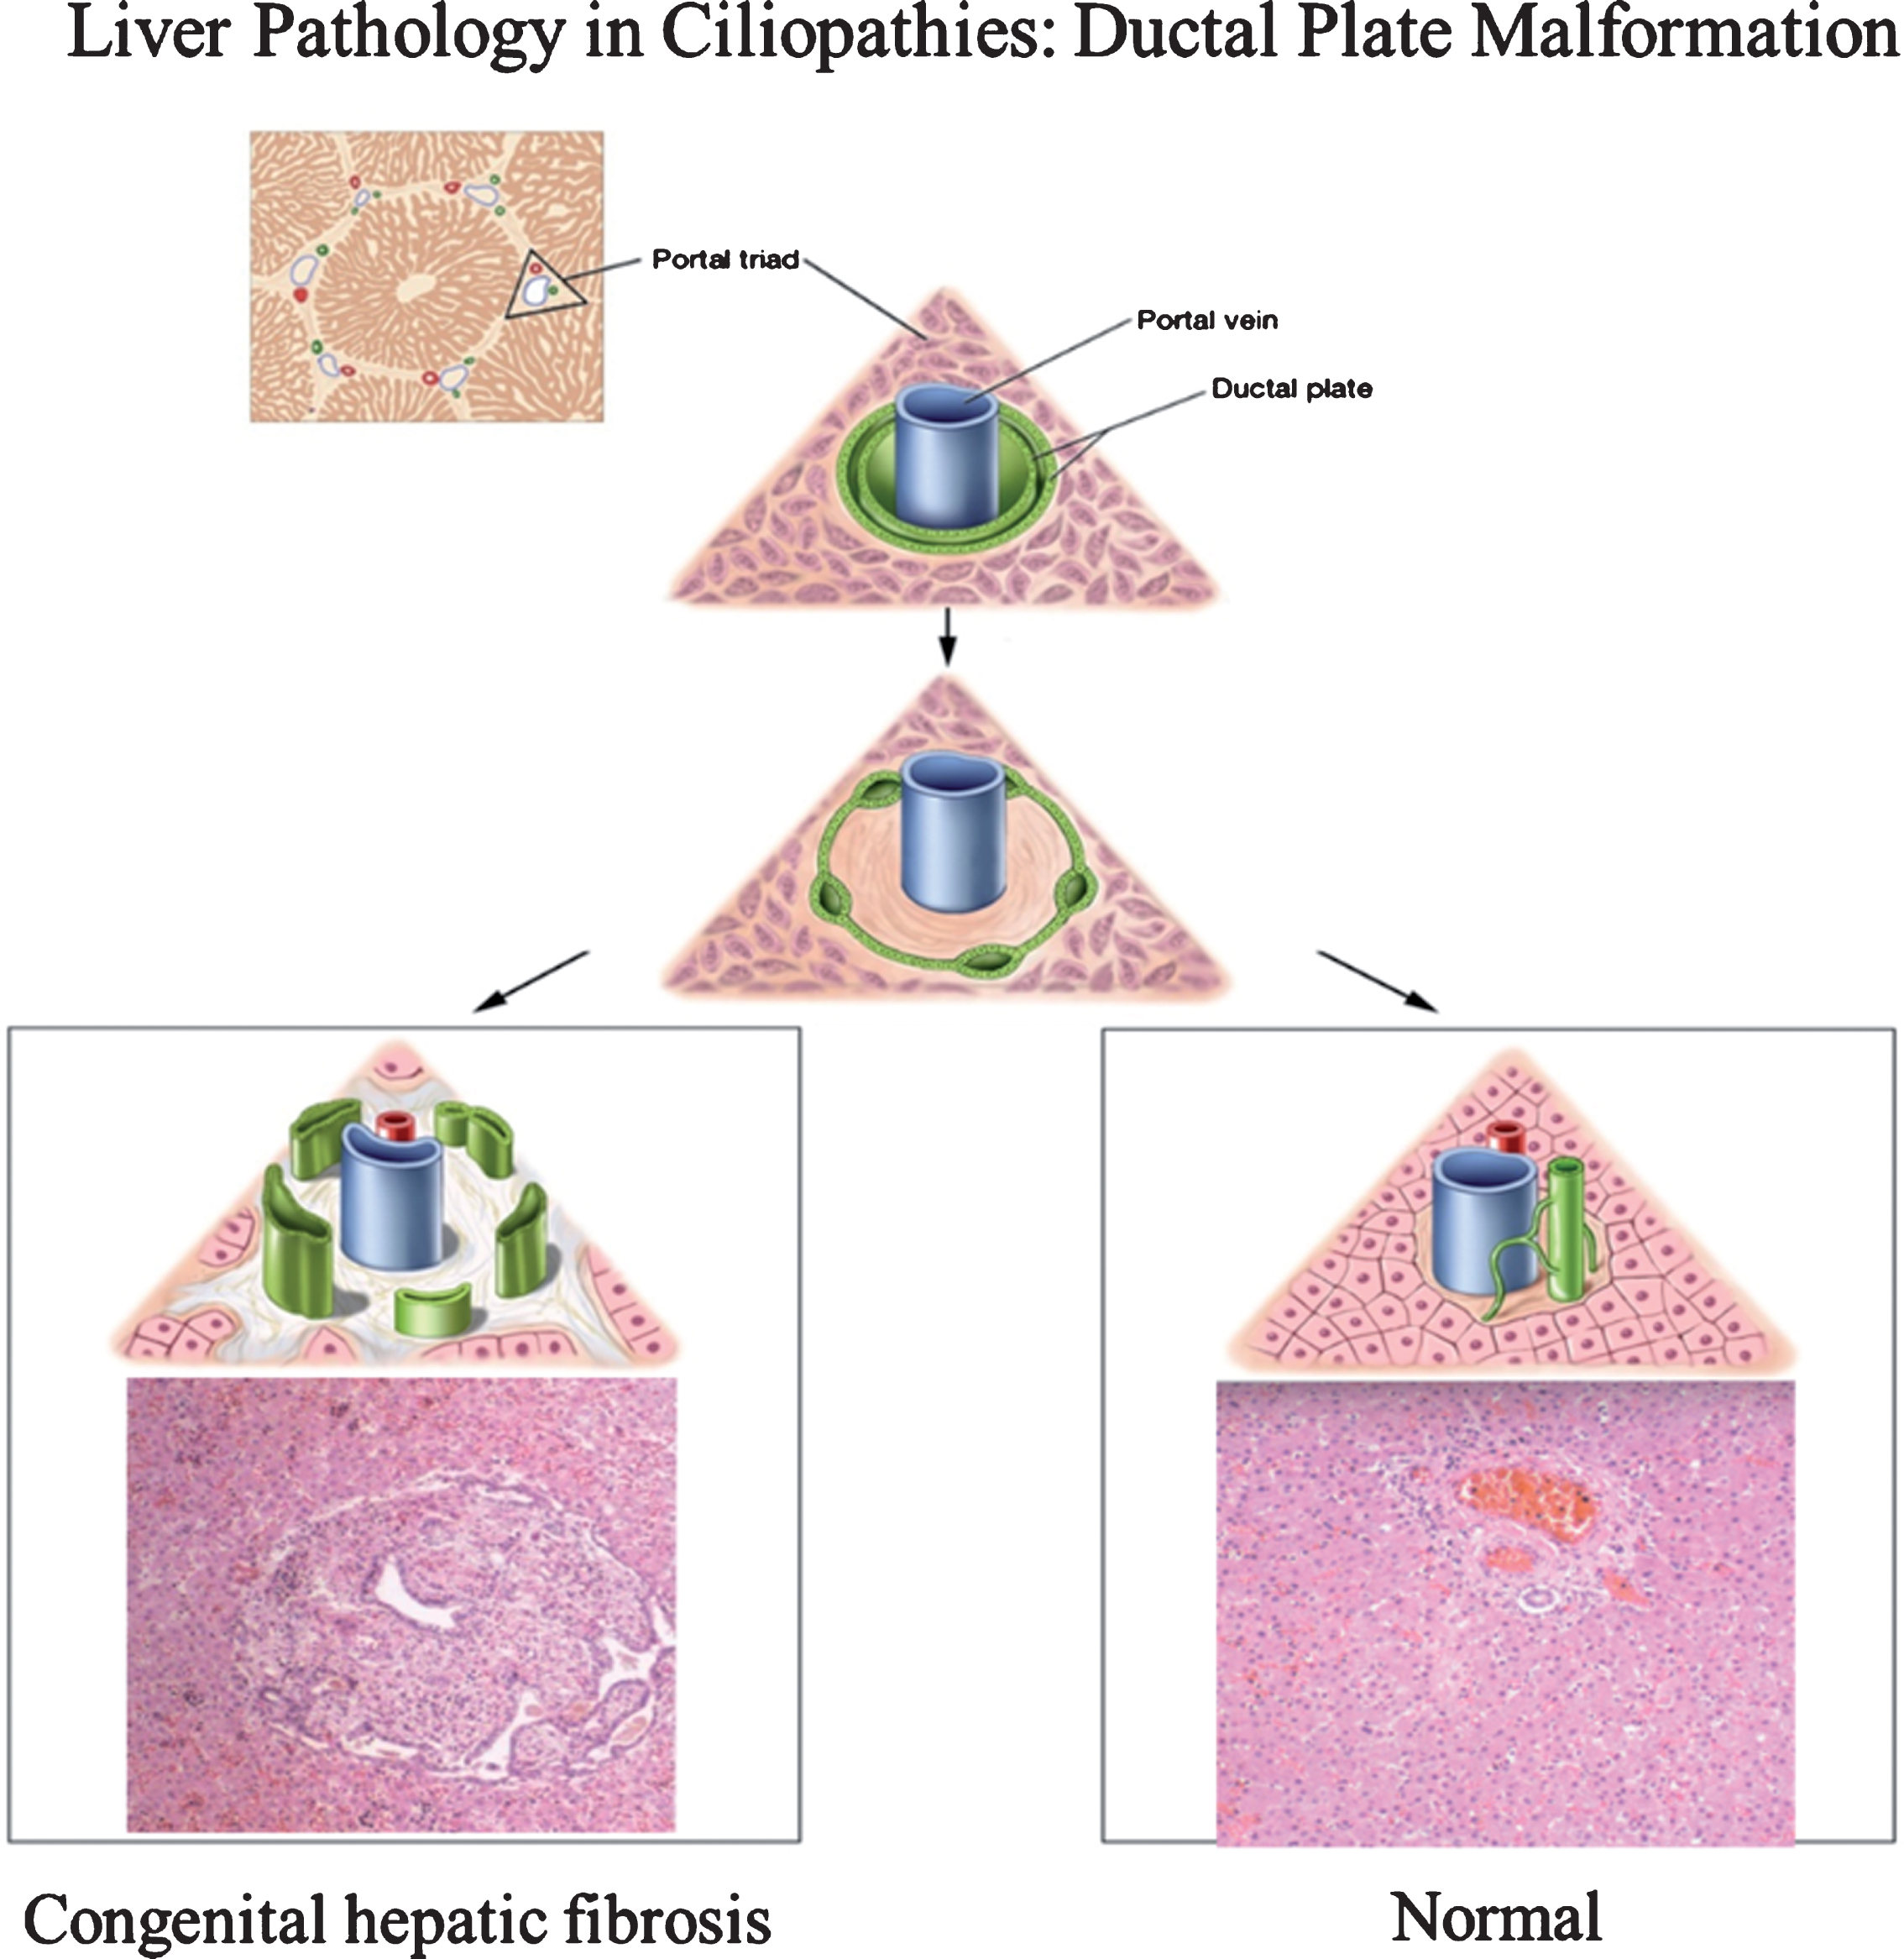 Drawings of ductal plate malformation in comparison to normal bile duct development and corresponding liver histopathology showing congenital hepatic fibrosis (CHF) and normal portal triad. The ductal plate initially forms as a sleeve-like structure around the portal vein branches. Normal remodeling of the ductal plate involves resorption of parts of this structure and migration of the remodeled ducts centrally closer to the portal vein (right panel). The liver biopsy at 10×magnification shows a normal portal tract with sections of portal vein, bile duct, and hepatic artery. Defective remodeling, termed the ductal plate malformation, is characterized by retention of excessive numbers of bile duct remnants in their original peripheral interrupted ring-like position (left panel). The biopsy with CHF shows persistence of bile duct remnants (magnification = 40×). (Liver biopsies are from Potter’s pathology of the fetus, infant and child, 2nd edition, Ed: Gilbert-Barness E. Mosby Elsevier.)